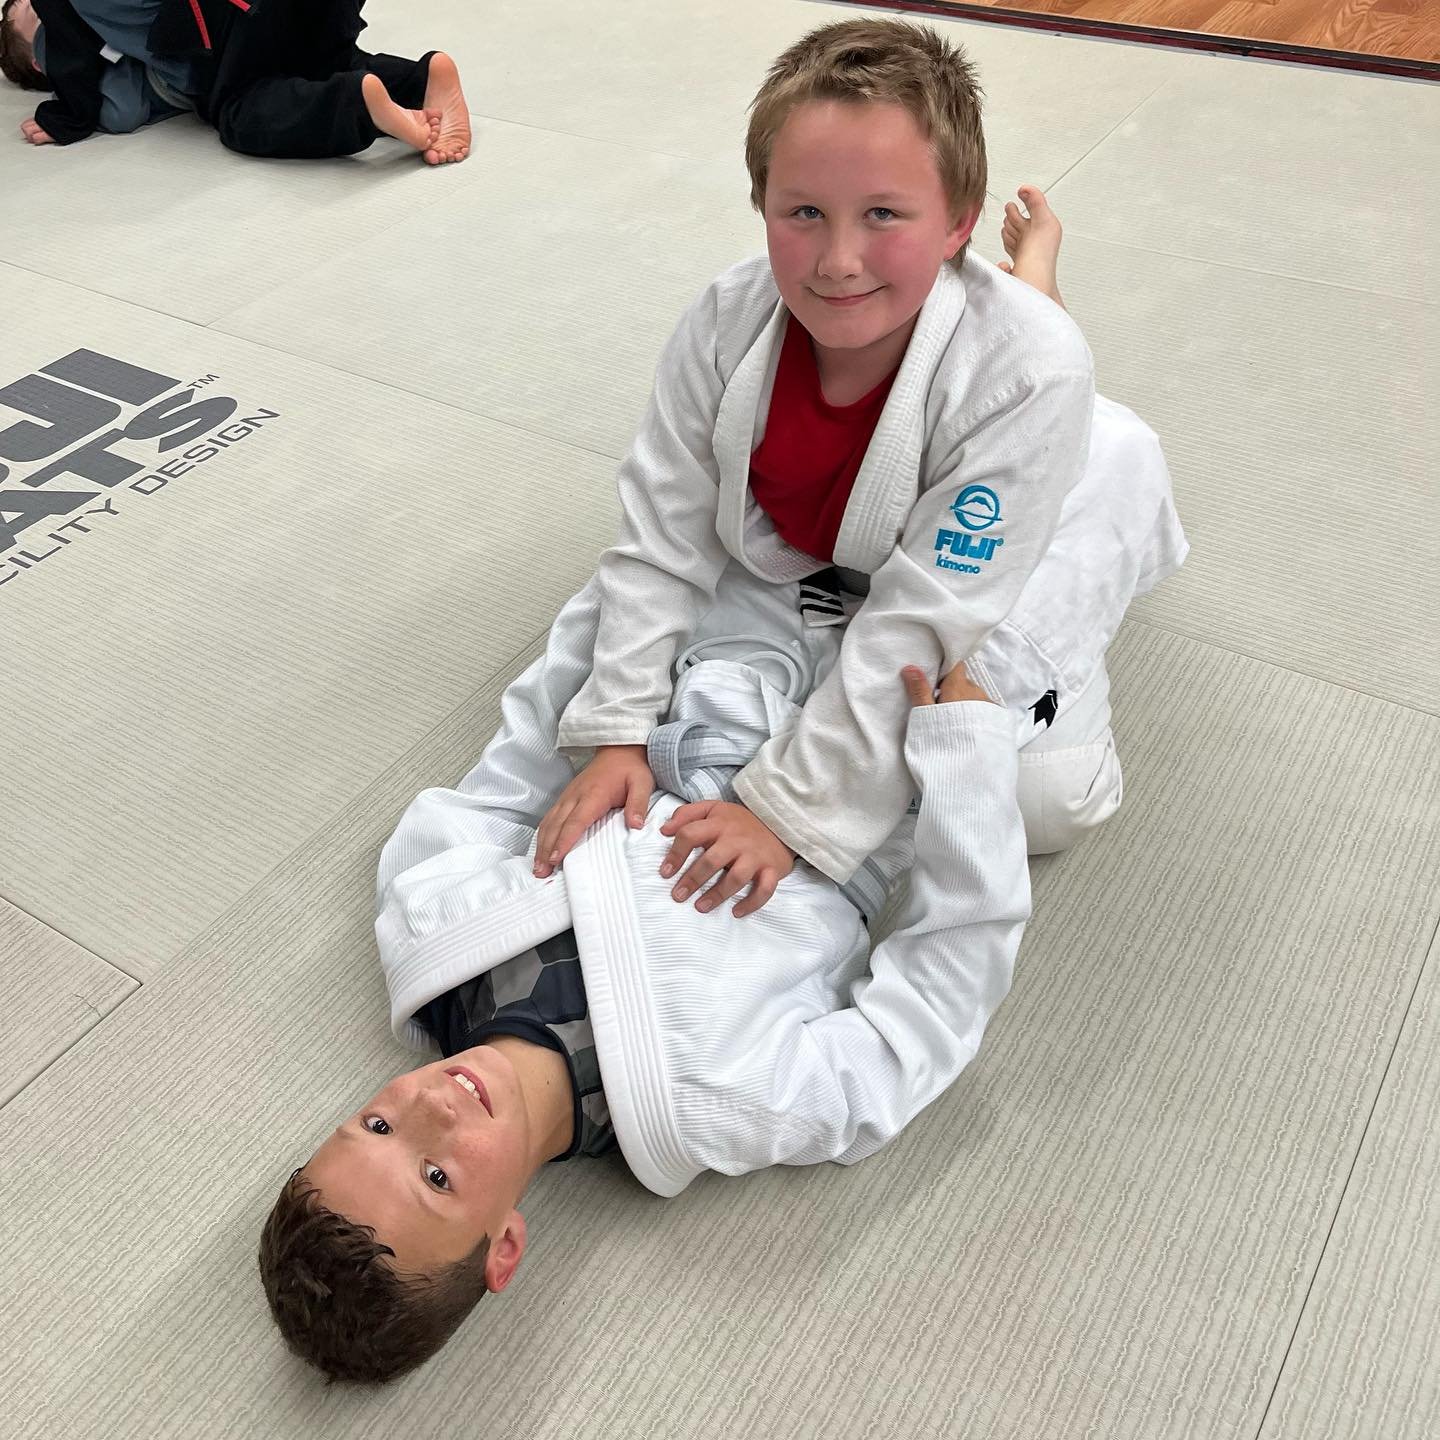 Making friends, building confidence and learning self defense. 

Kids classes 4 days a week. www.victorymartialartsbjj.com